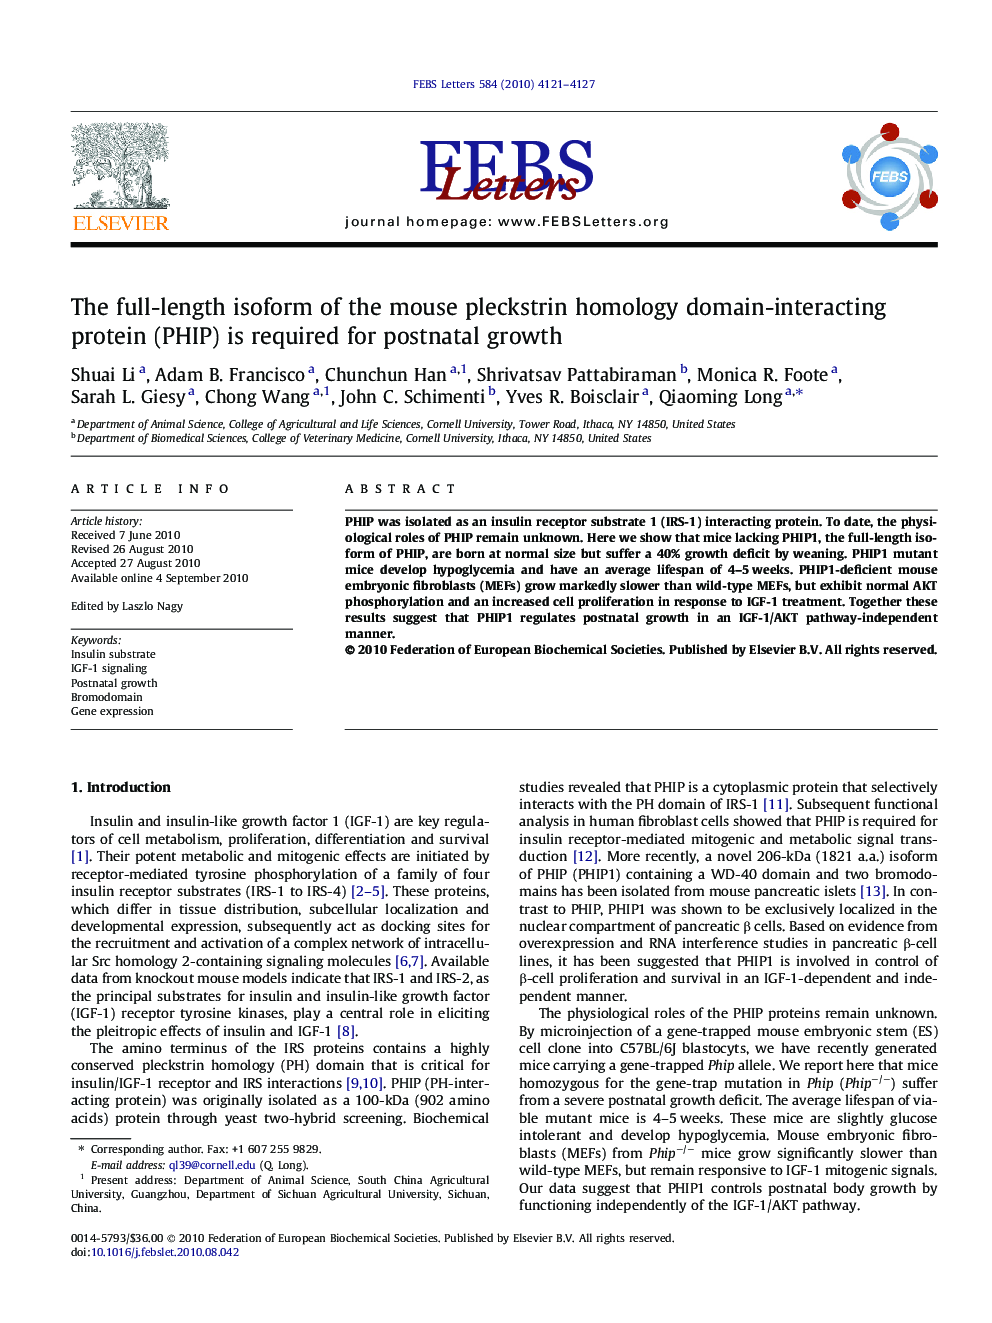 The full-length isoform of the mouse pleckstrin homology domain-interacting protein (PHIP) is required for postnatal growth